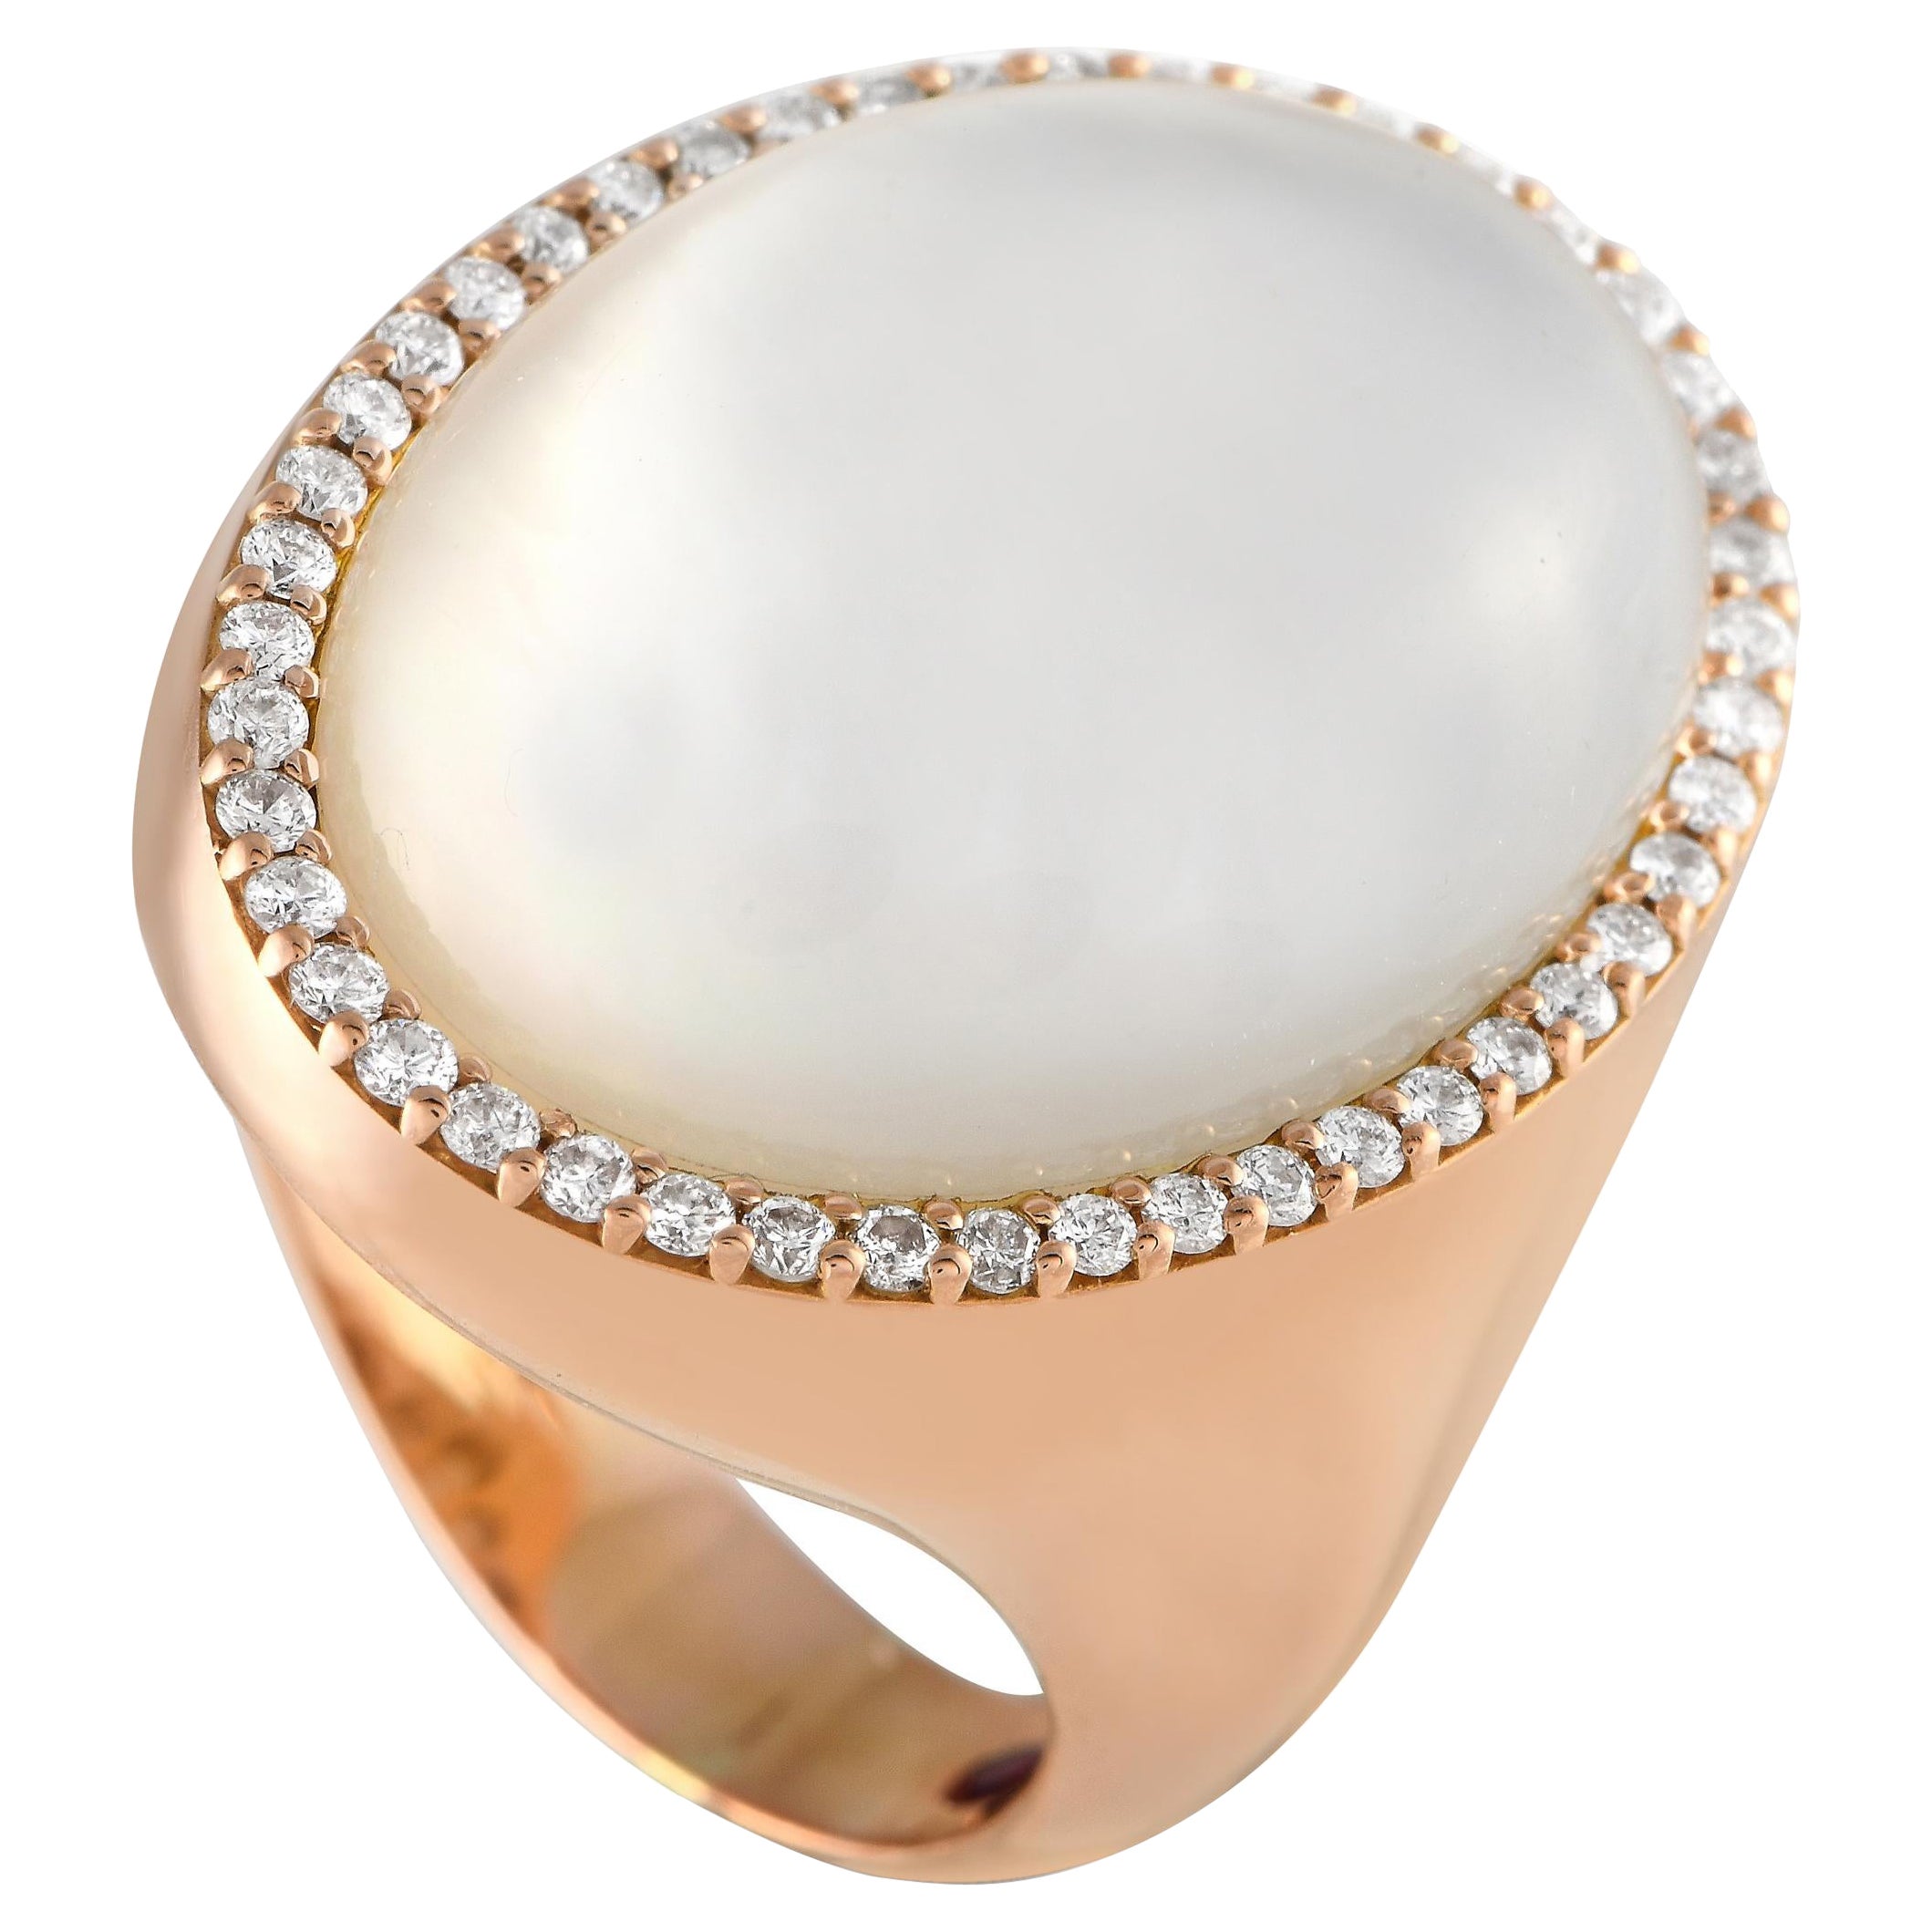 Roberto Coin 18K Rose Gold 0.55ct Diamond and Mother of Pearl Ring